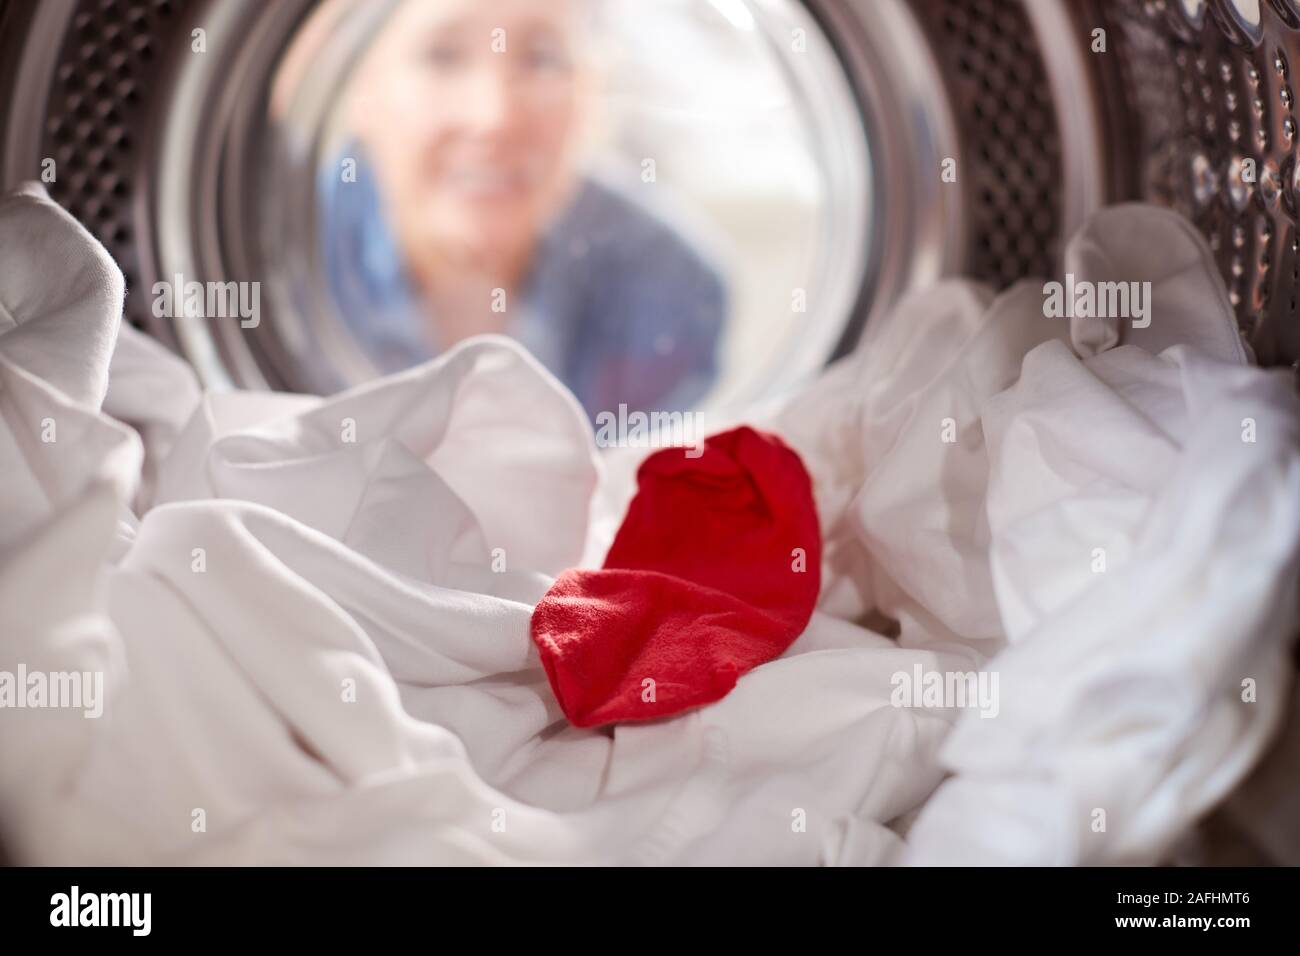 Woman Looking Inside Washing Machine With Red Sock Mixed With White Laundry Stock Photo